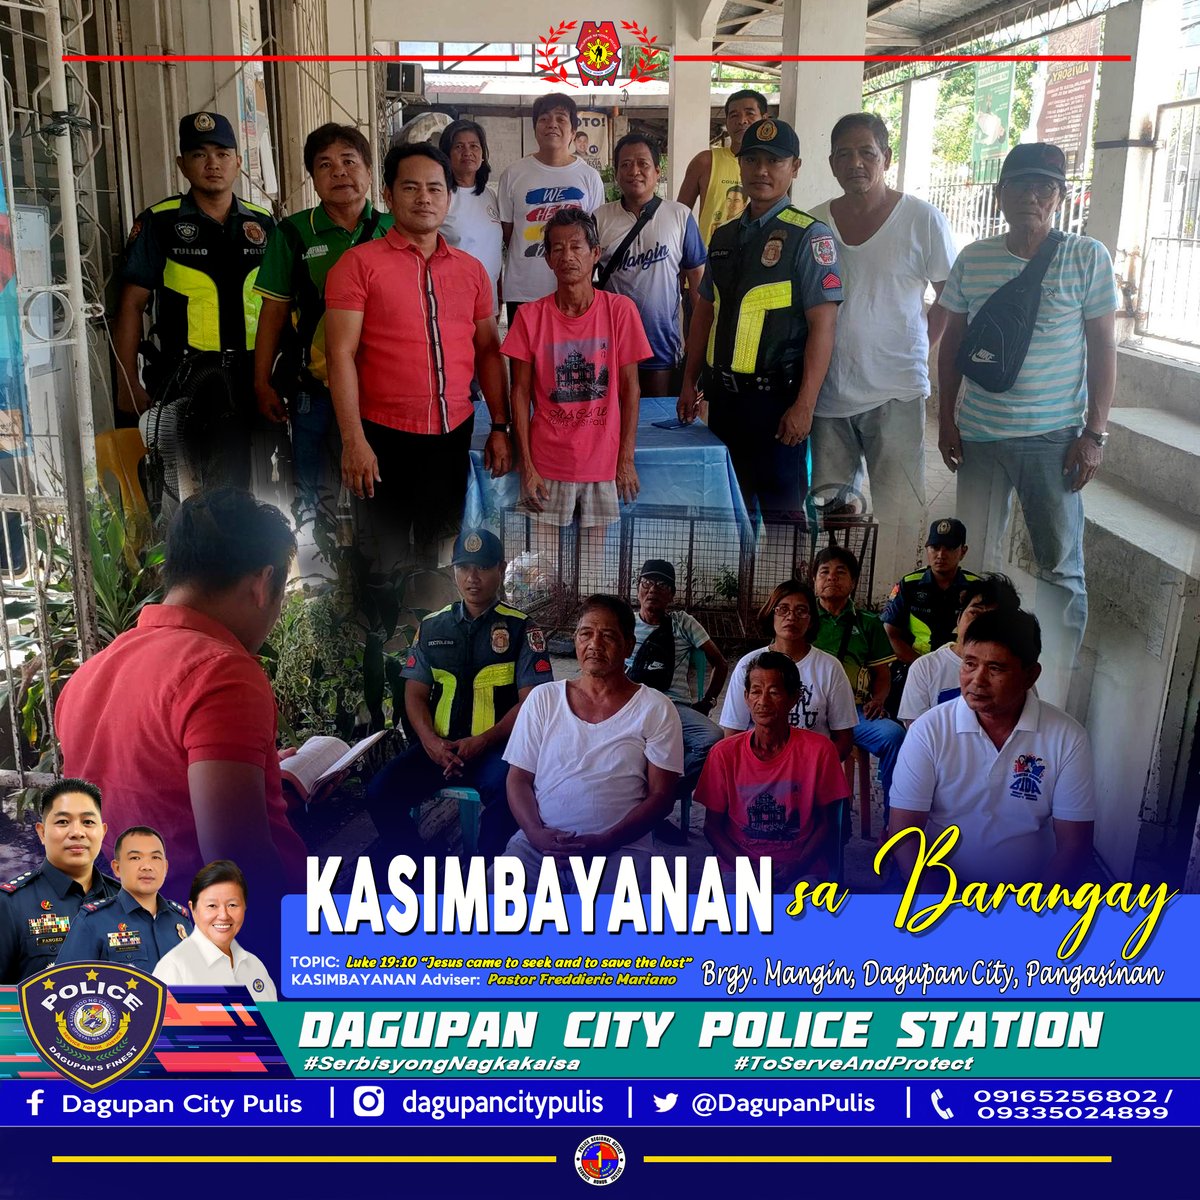 Pastor Freddieric Mariano, KASIMBAYANAN Adviser, together with Dagupan CPS personnel, under the supervision of PLTCOL BRENDON B. PALISOC, OIC, conducted the KASIMBAYANAN Weekly Interactive Meeting (KWIM) at Barangay Mangin, Dagupan City.